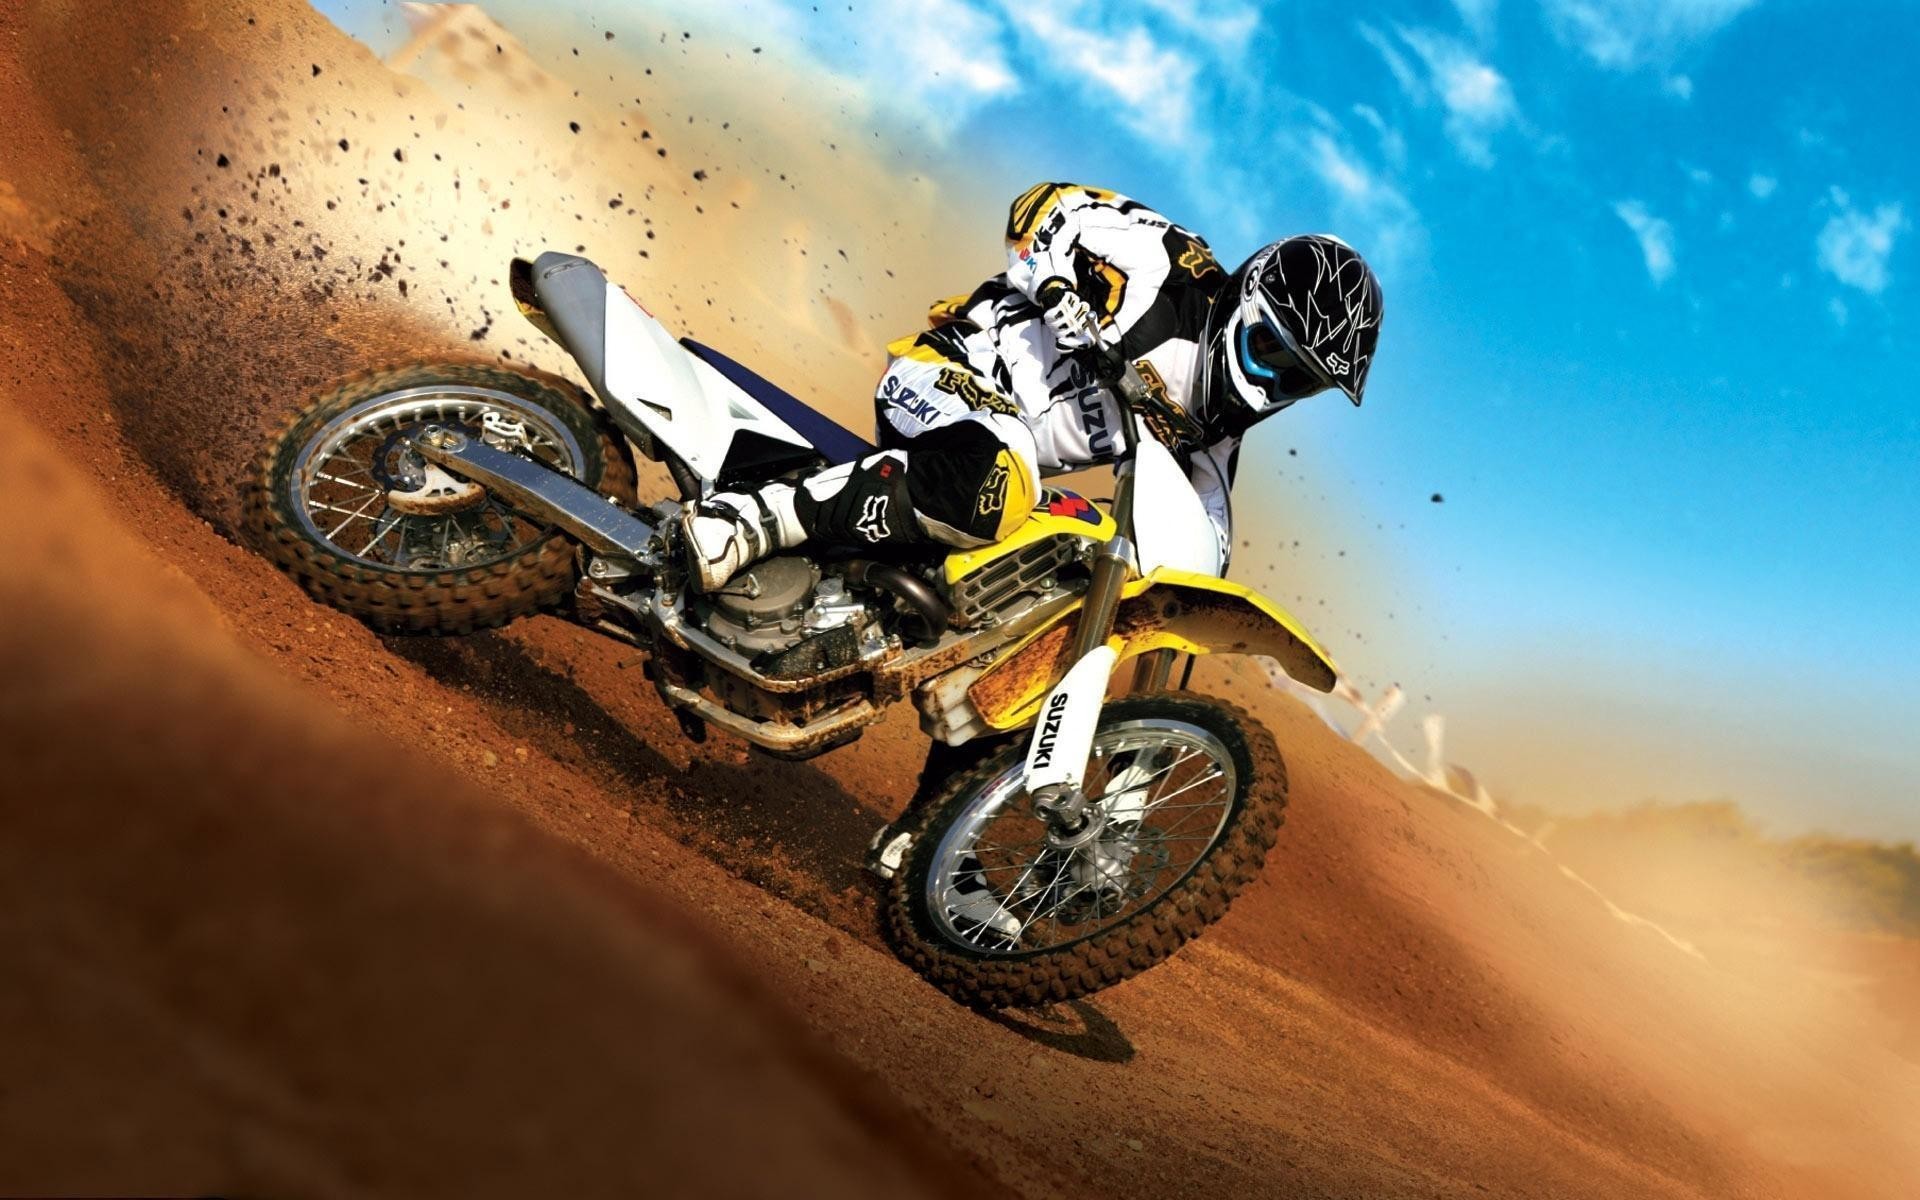 1920x1200 Super Dirt Bike - Bikes and Motorcycle Wallpapers | Best HD .